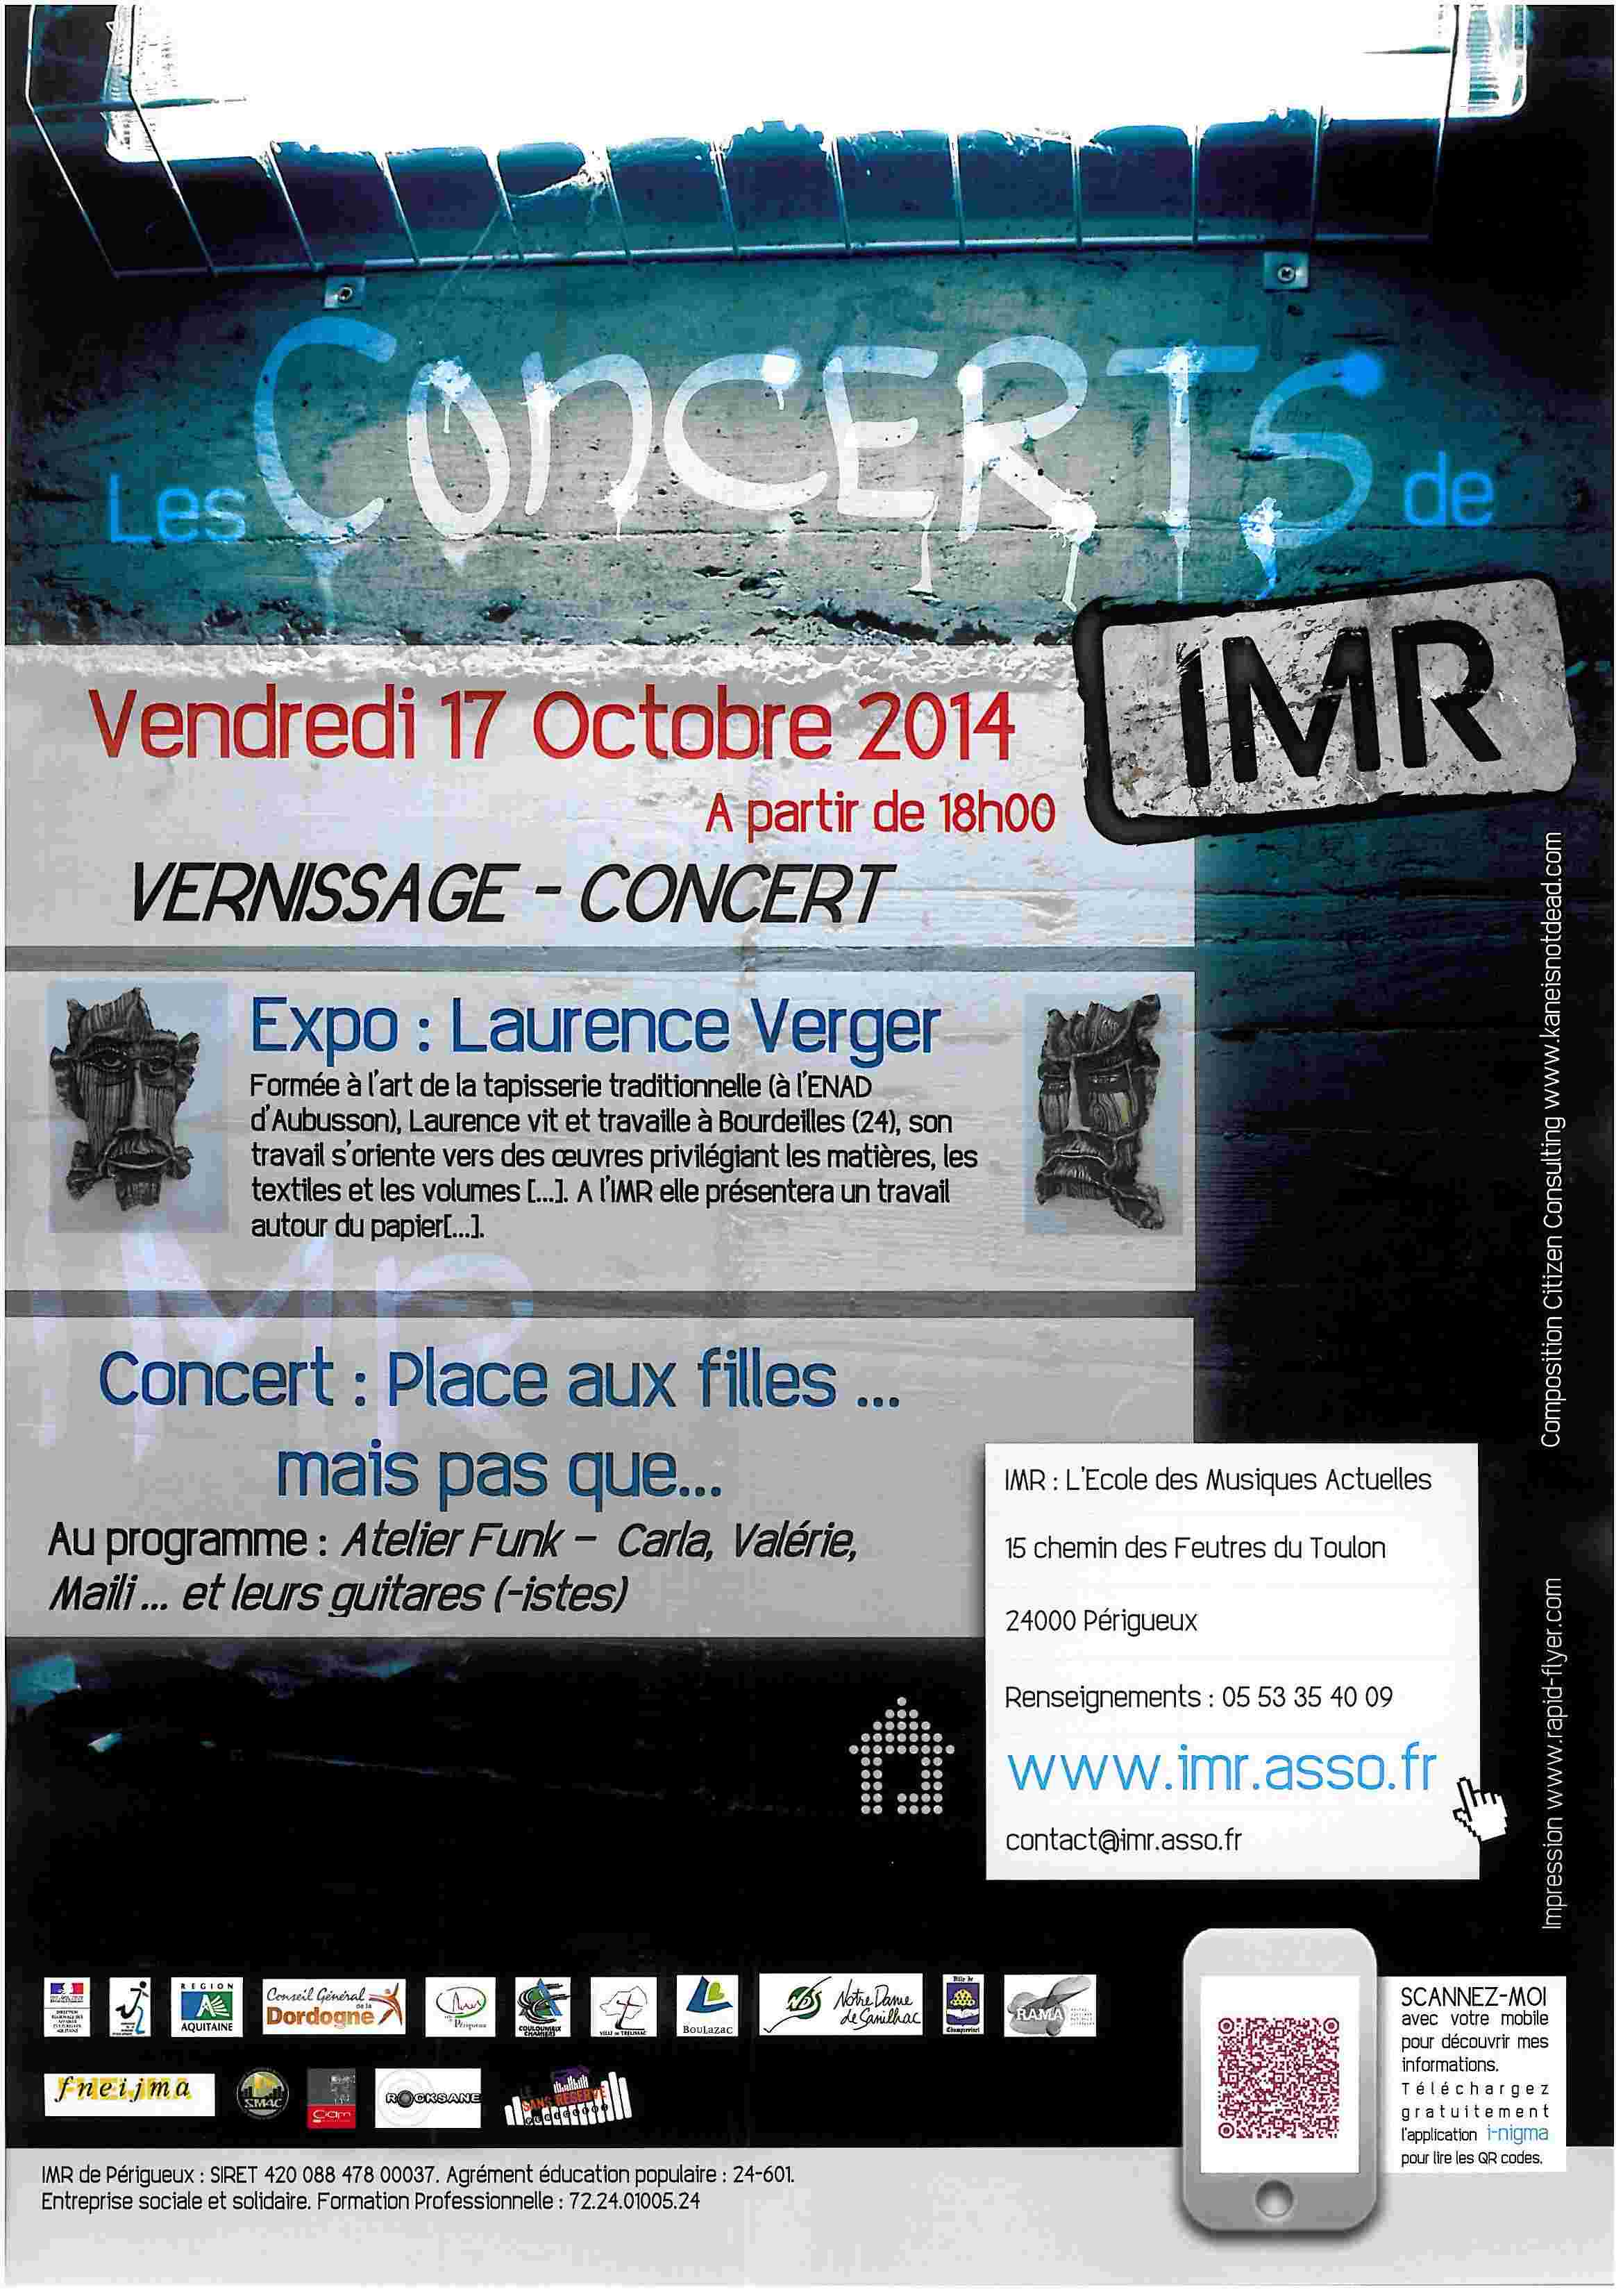 You are currently viewing Vernissage Laurence Verger – Concert Atelier Funk – Vendredi 17 Octobre 2014